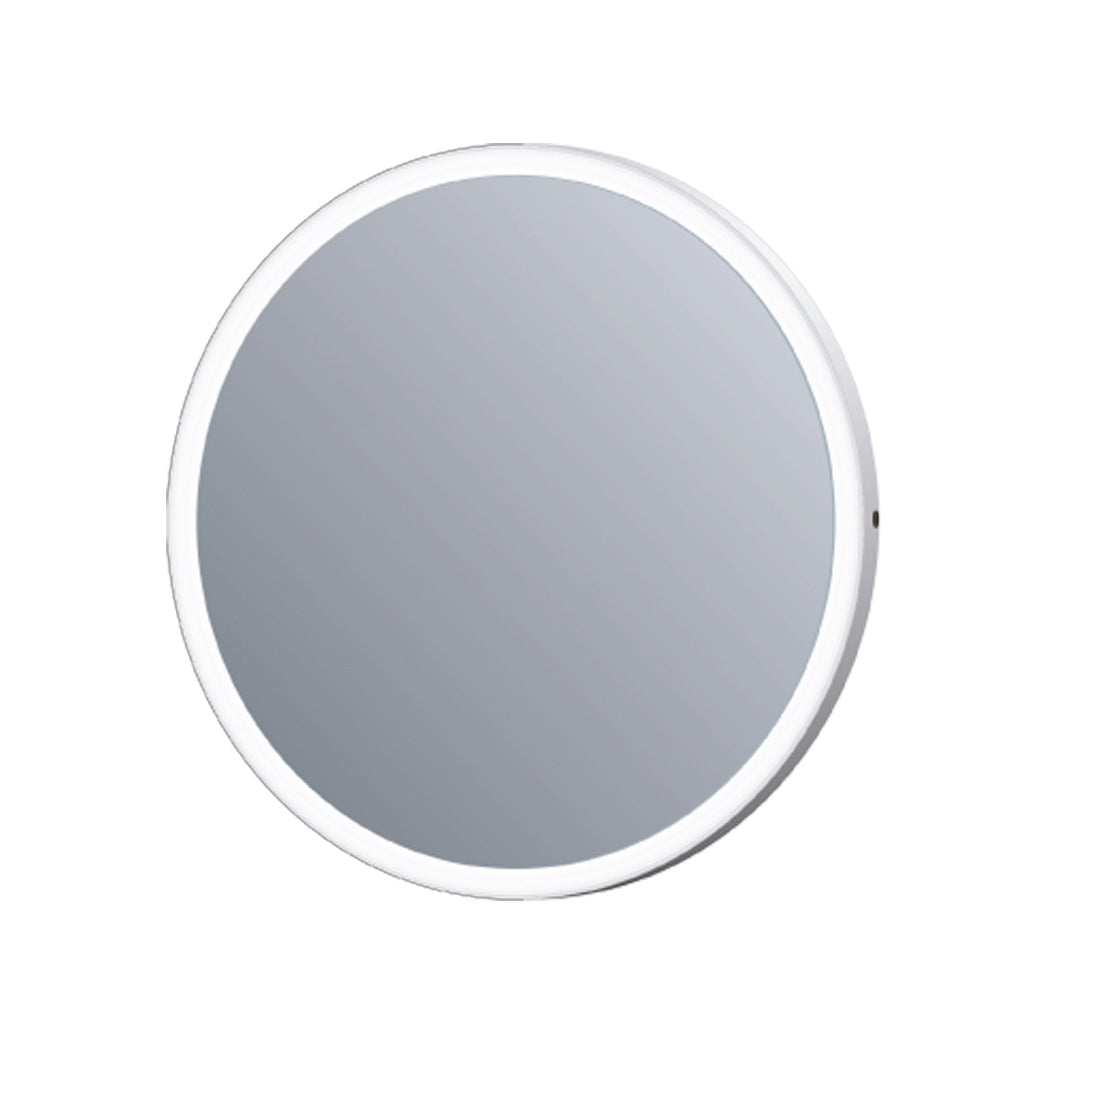 32" Round Mirror. MDF Back Reflected Light. IR Motion Sensor switch with magnify integrated (DAX-DL50-8080)